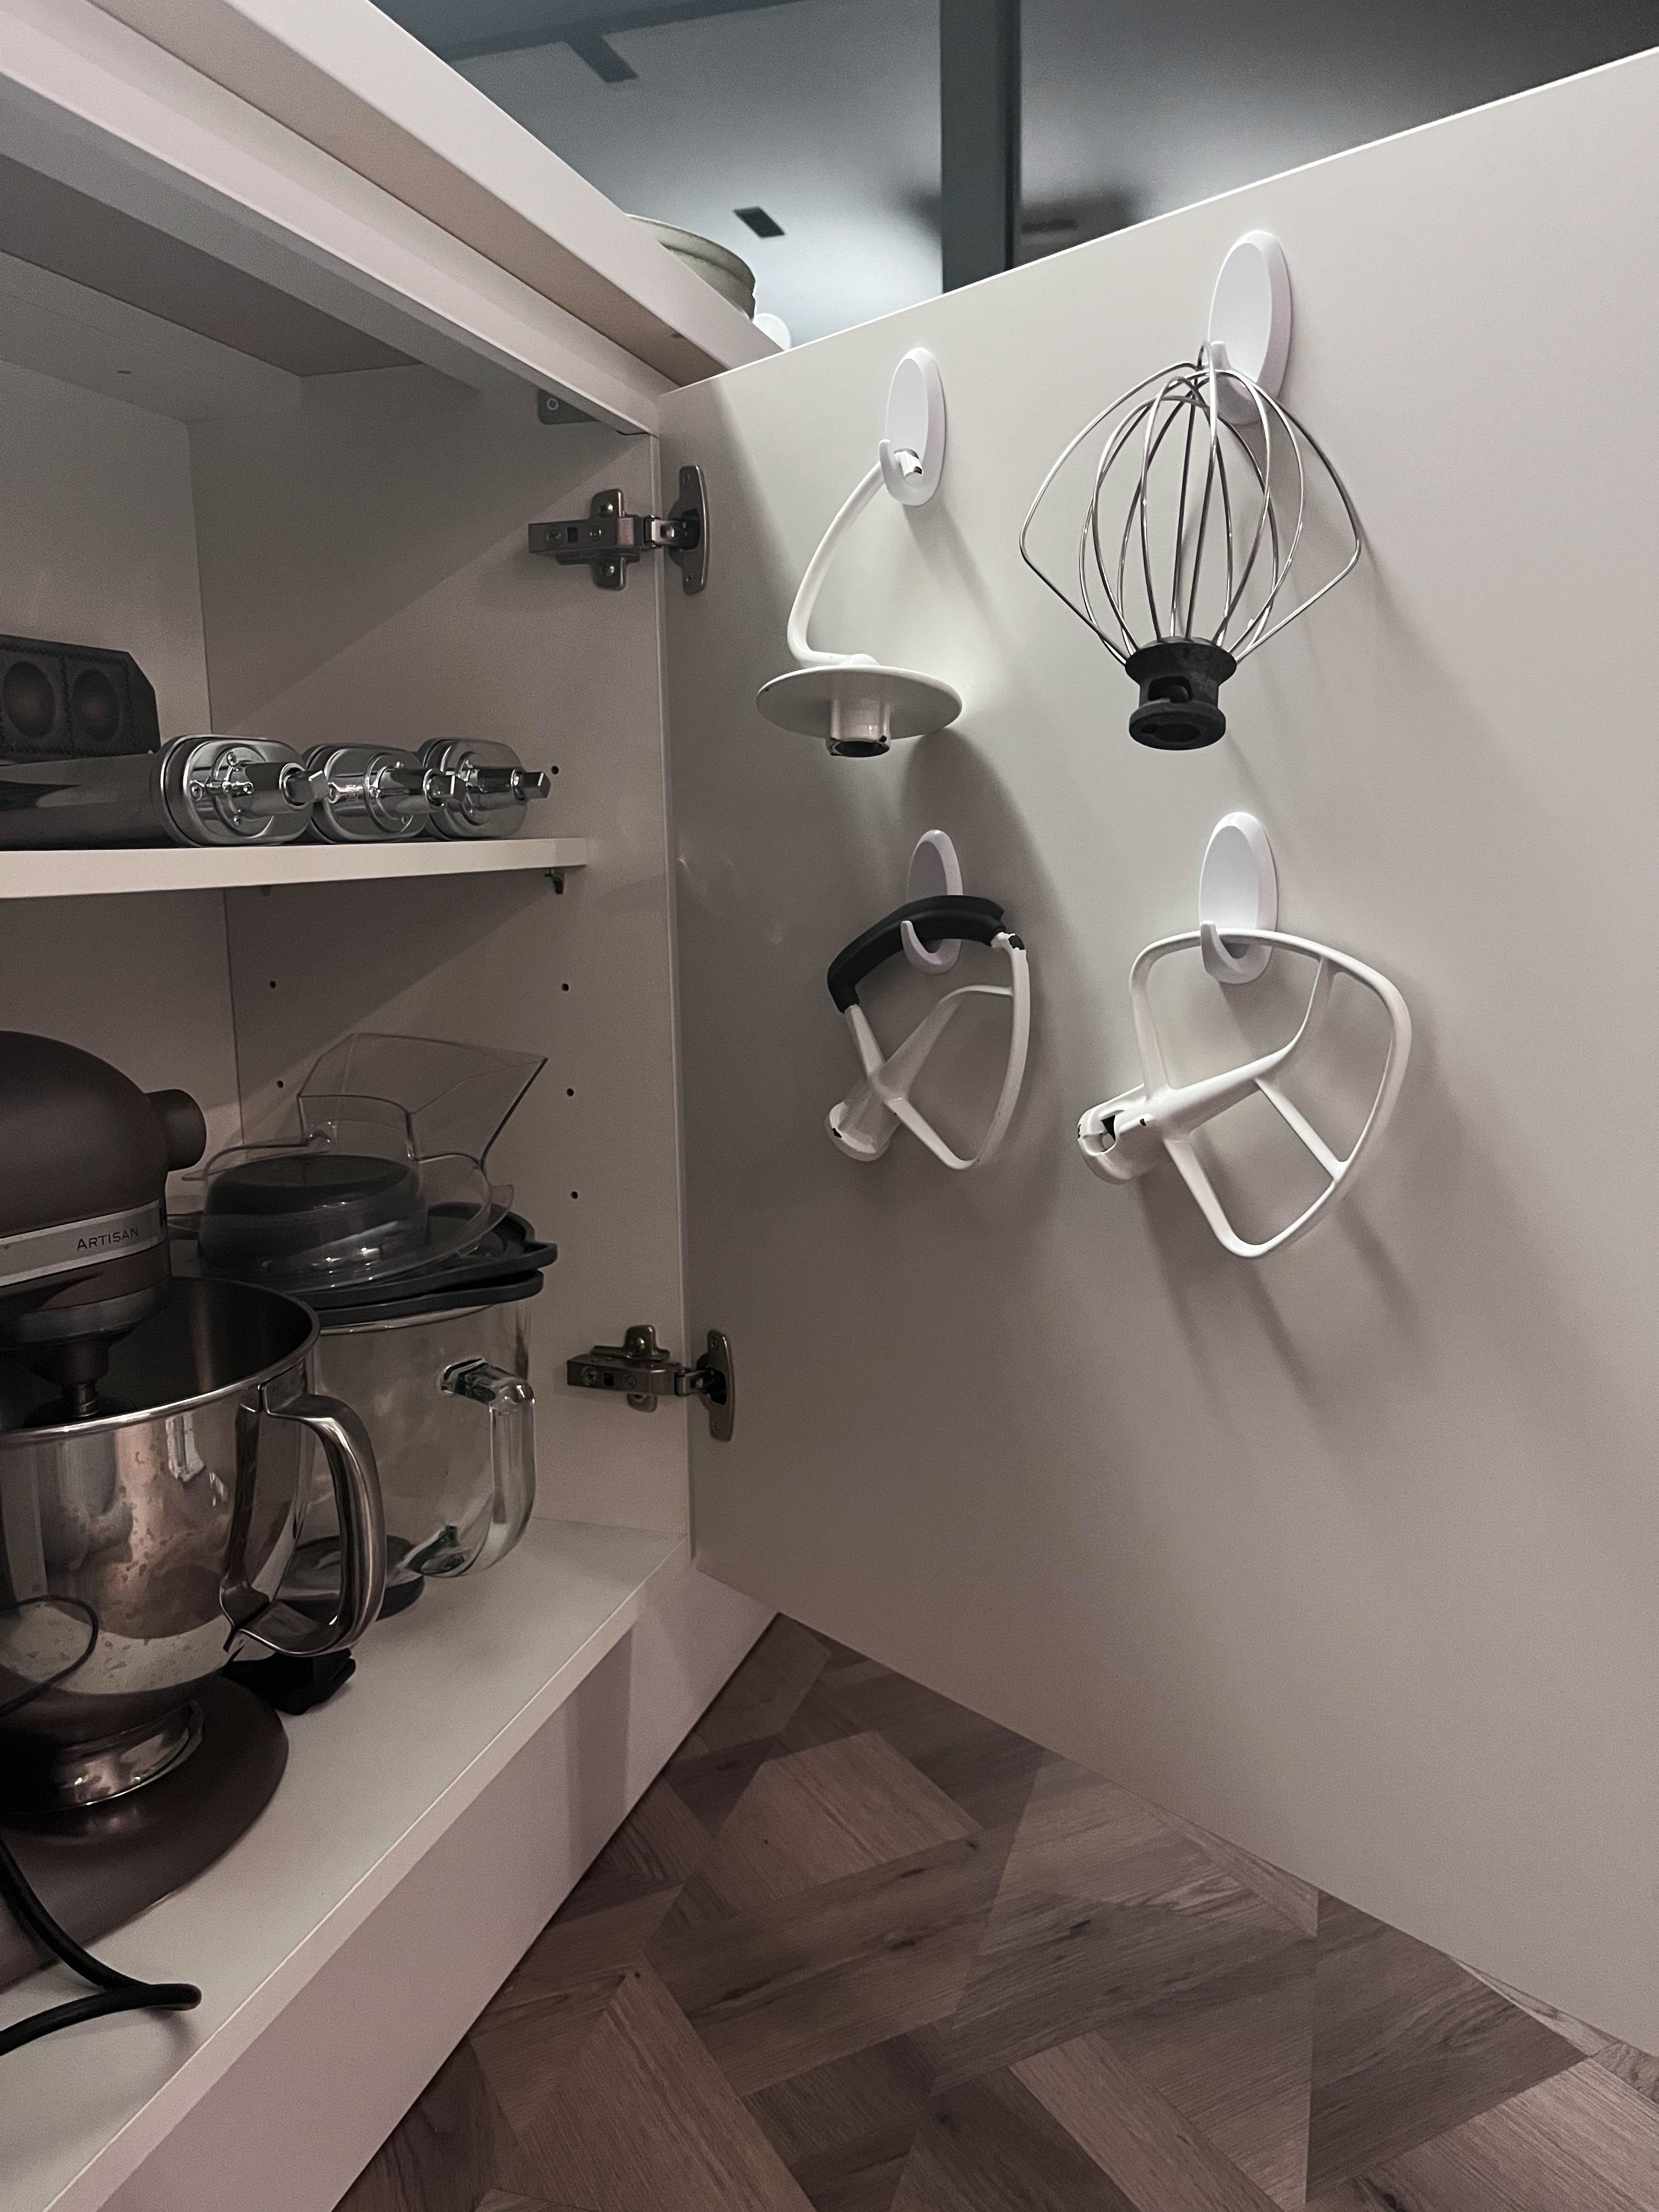 Various mixer attachments hanging via Command hooks on a cabinet door